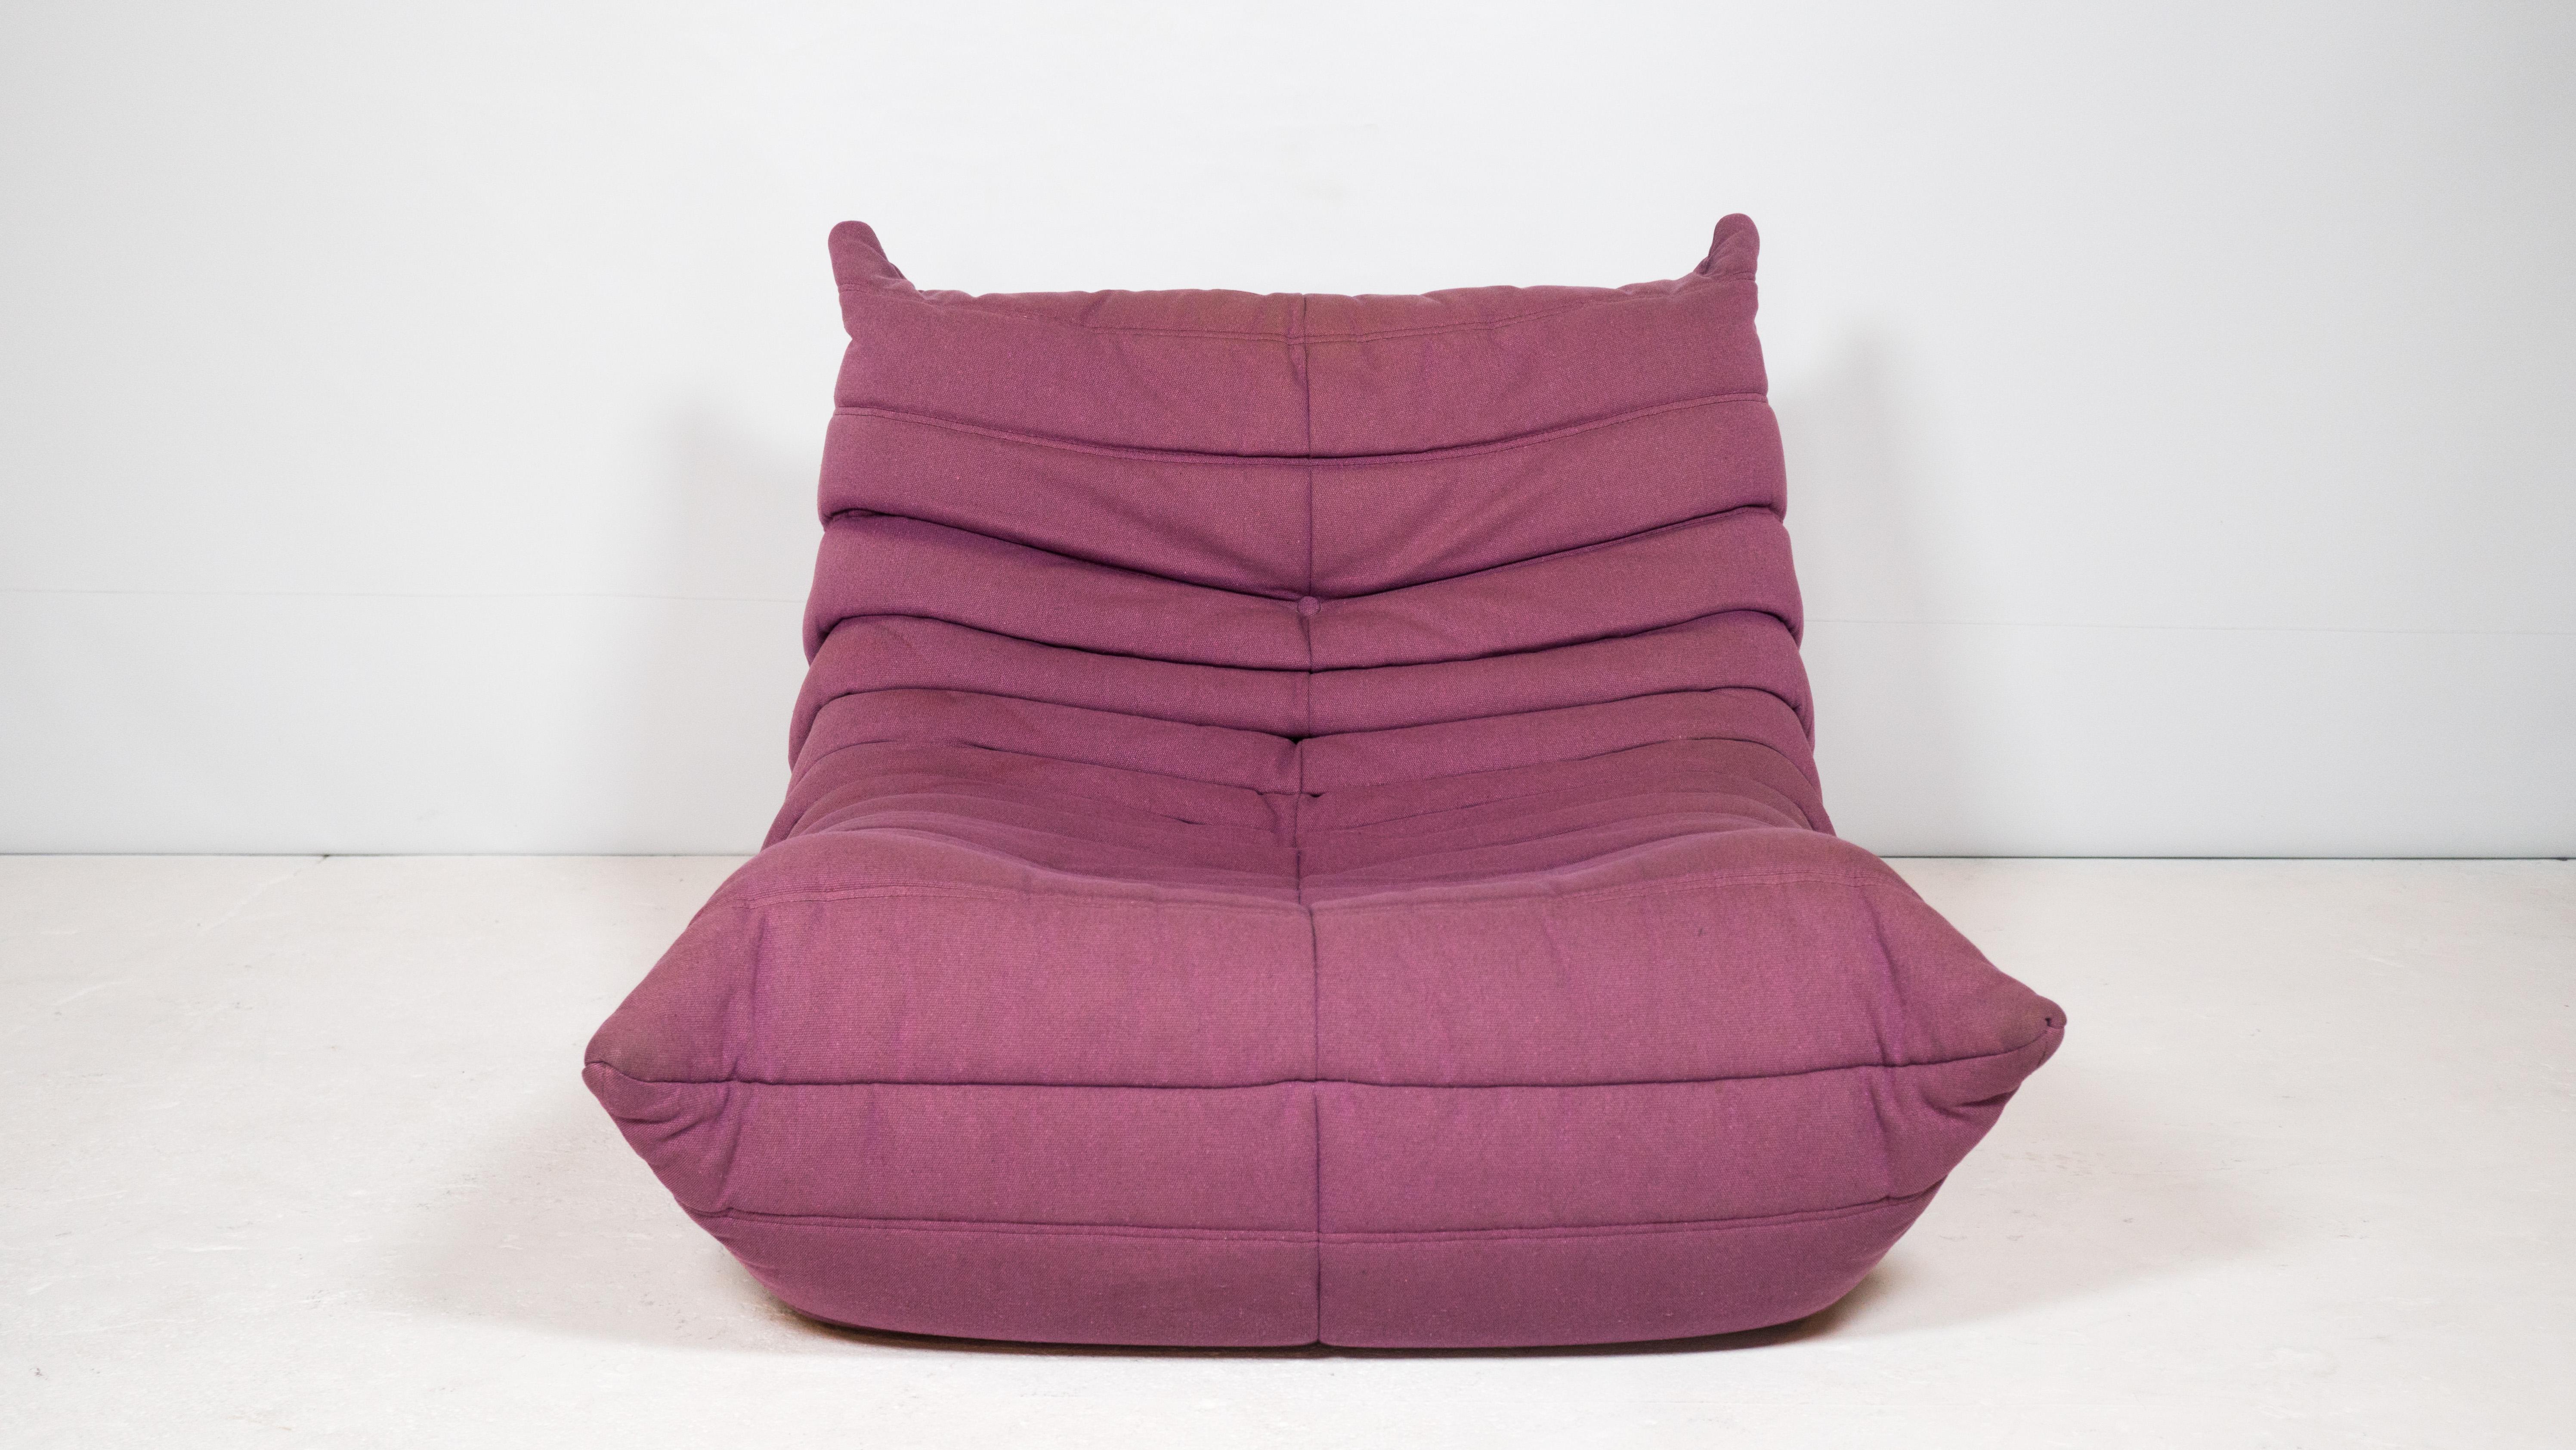 Ligne Roset Togo Fireside chair by Michel Ducaroy in original thick purple linen fabric, circa 2000s. Whimsical design and unique form that is both visually pleasing and physically inviting. Playful and engulfing seating experience. Good used